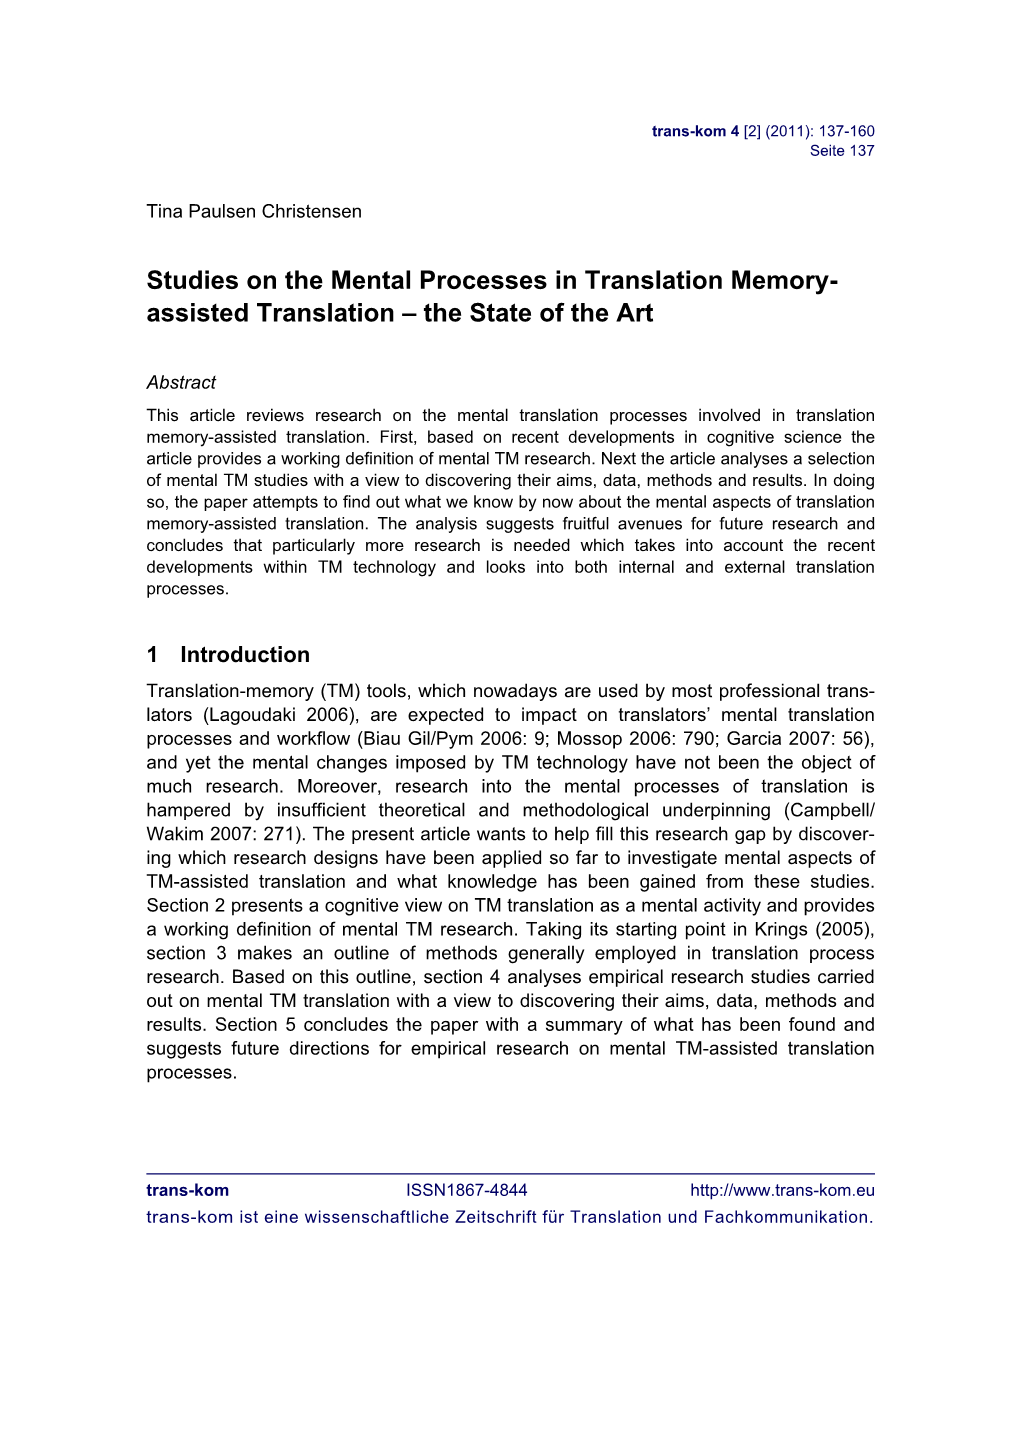 Studies on the Mental Processes in Translation Memory- Assisted Translation – the State of the Art